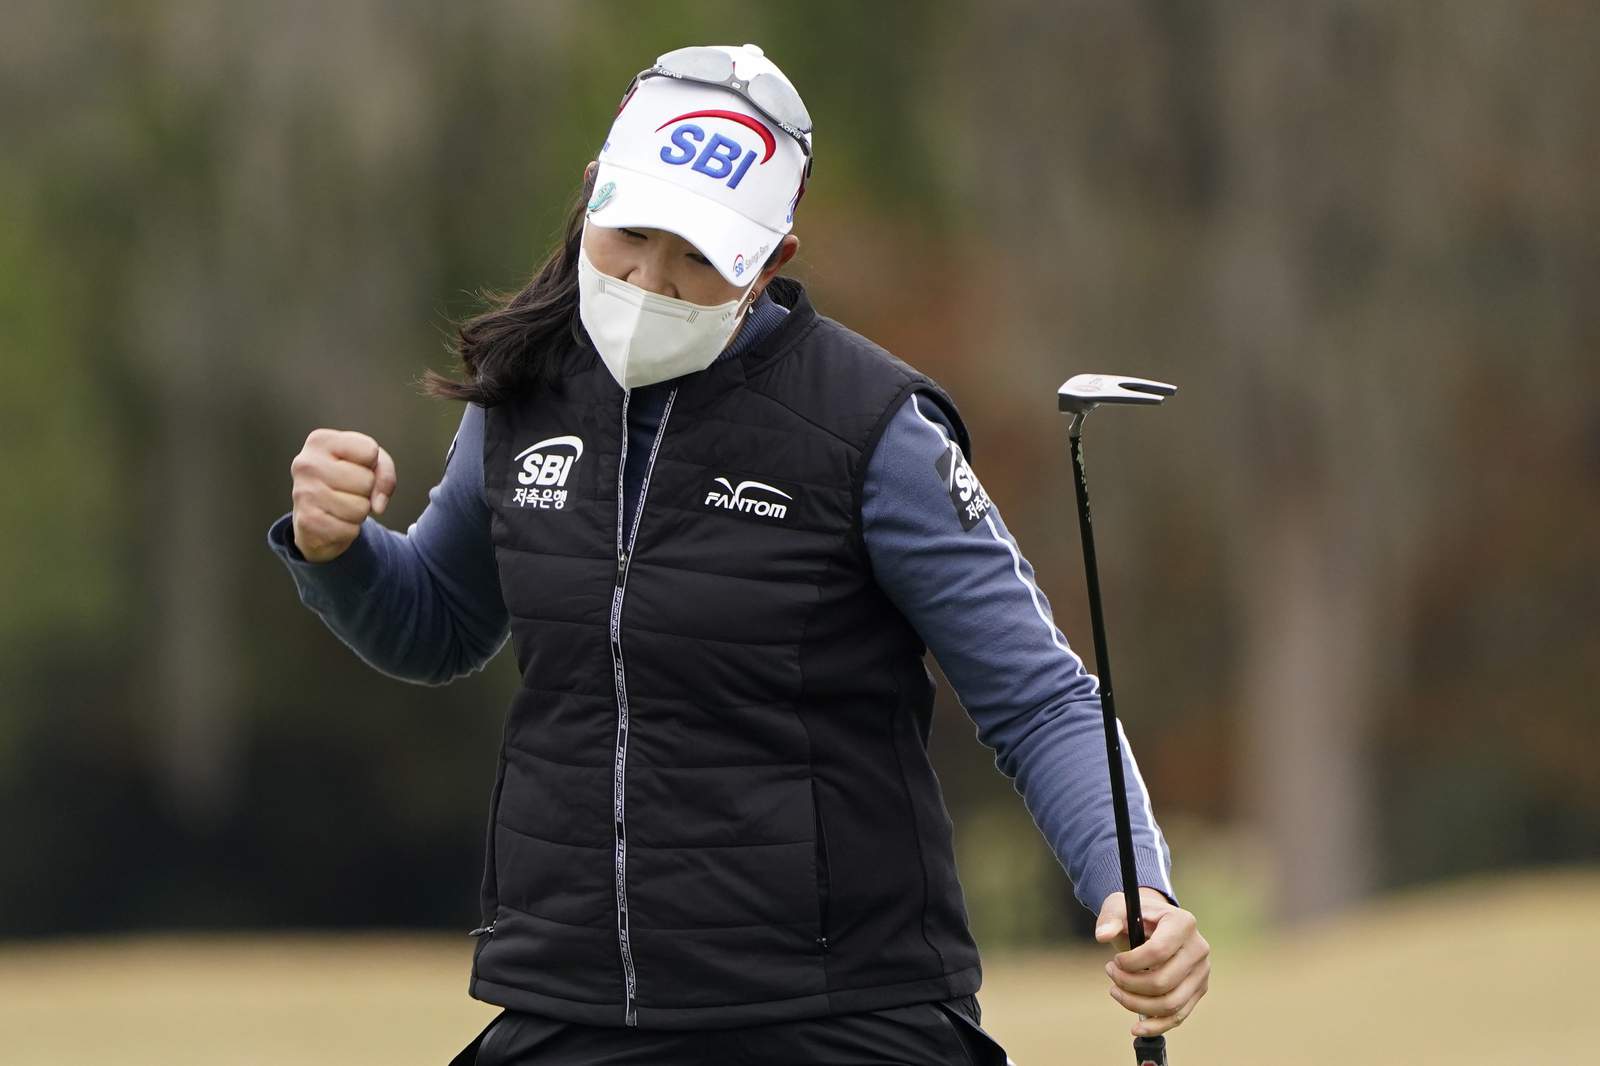 Kim wins US Women's Open debut with record-tying comeback